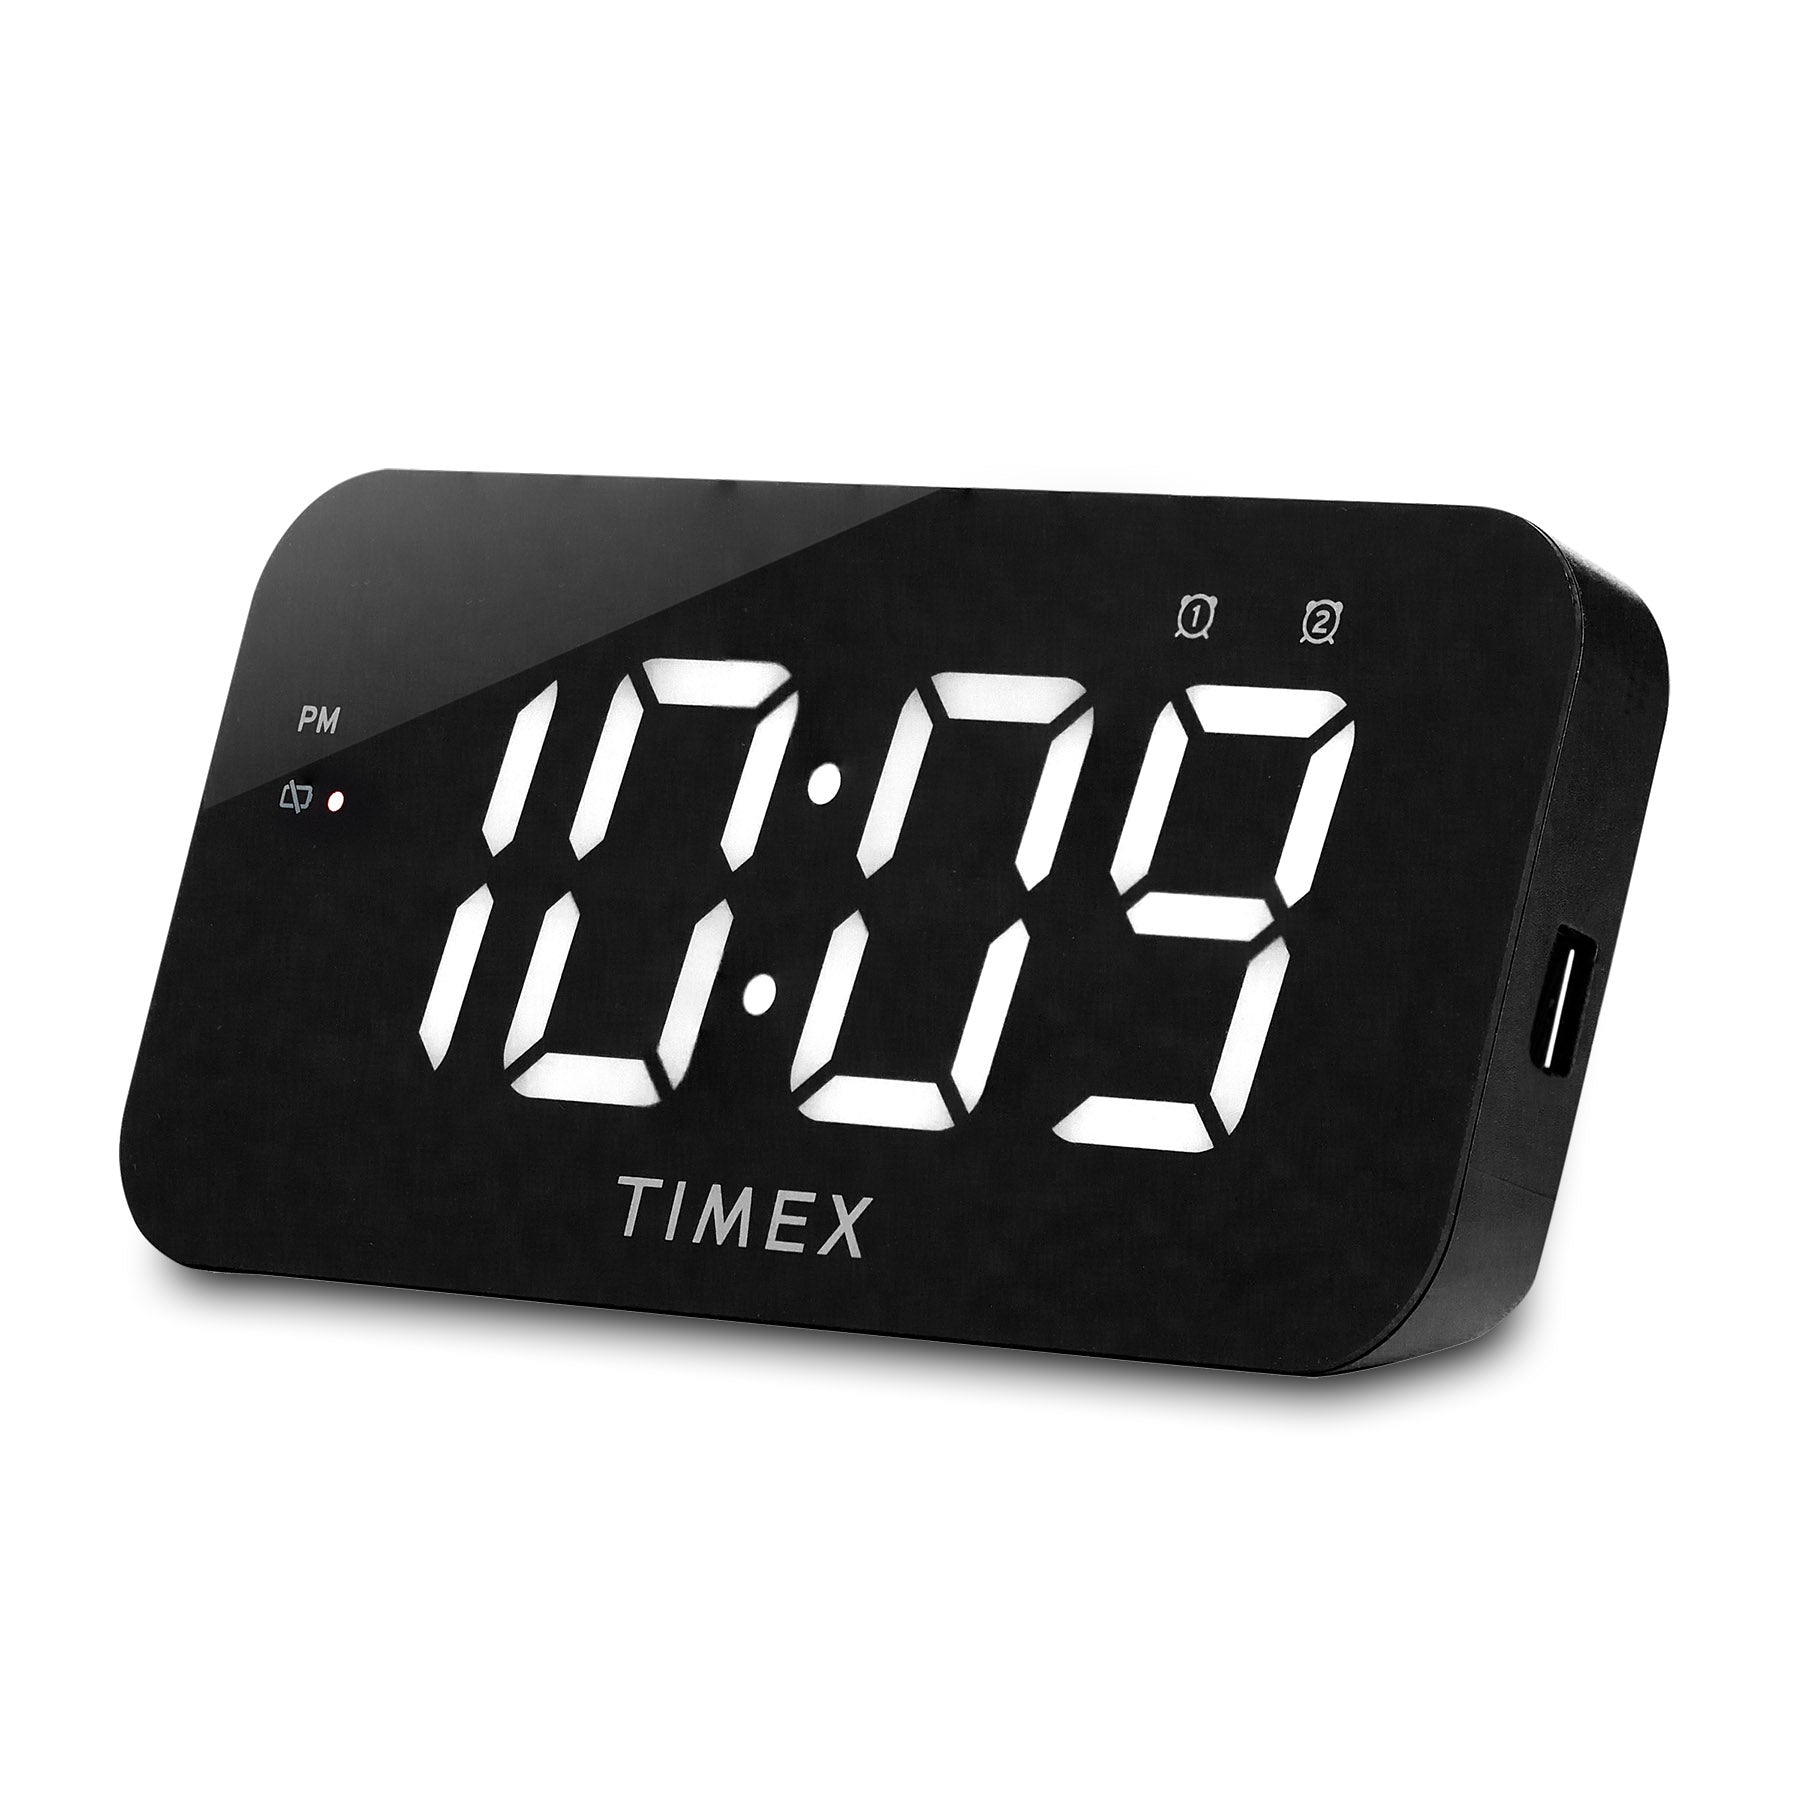 Timex Alarm Clock with USB Charger and Large Display - Black (T1320)